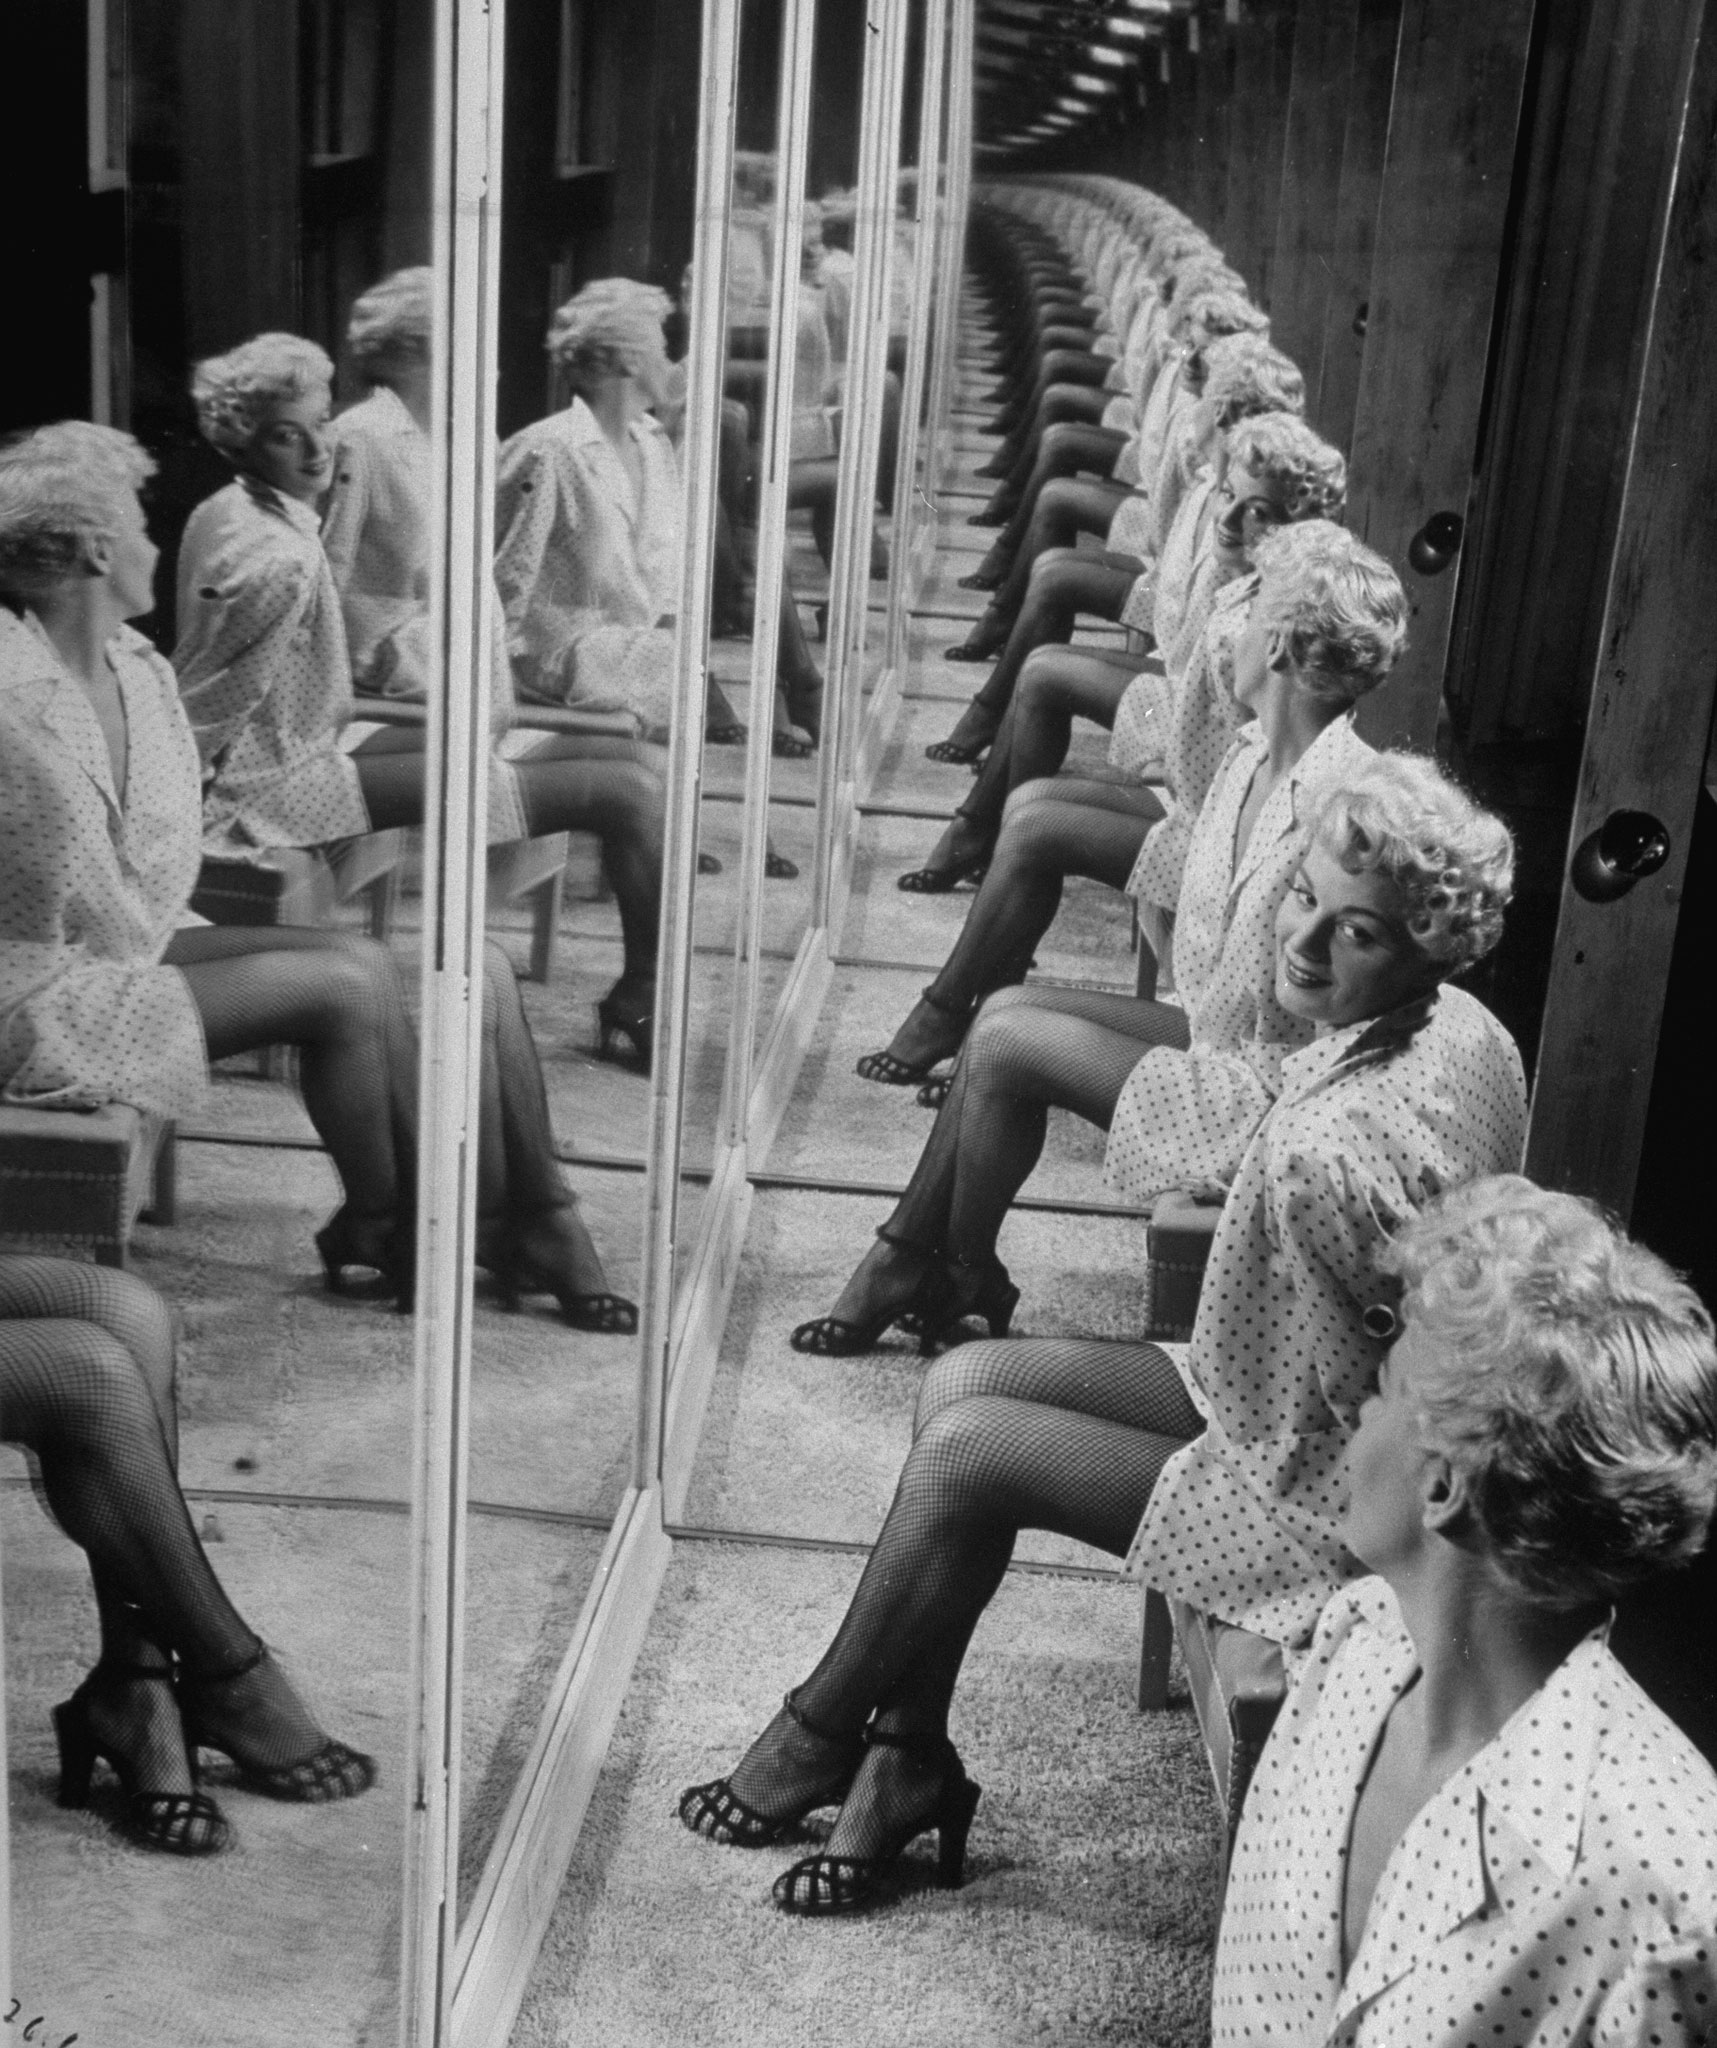 Shelley Winters in a booth with mirrors, 1949.